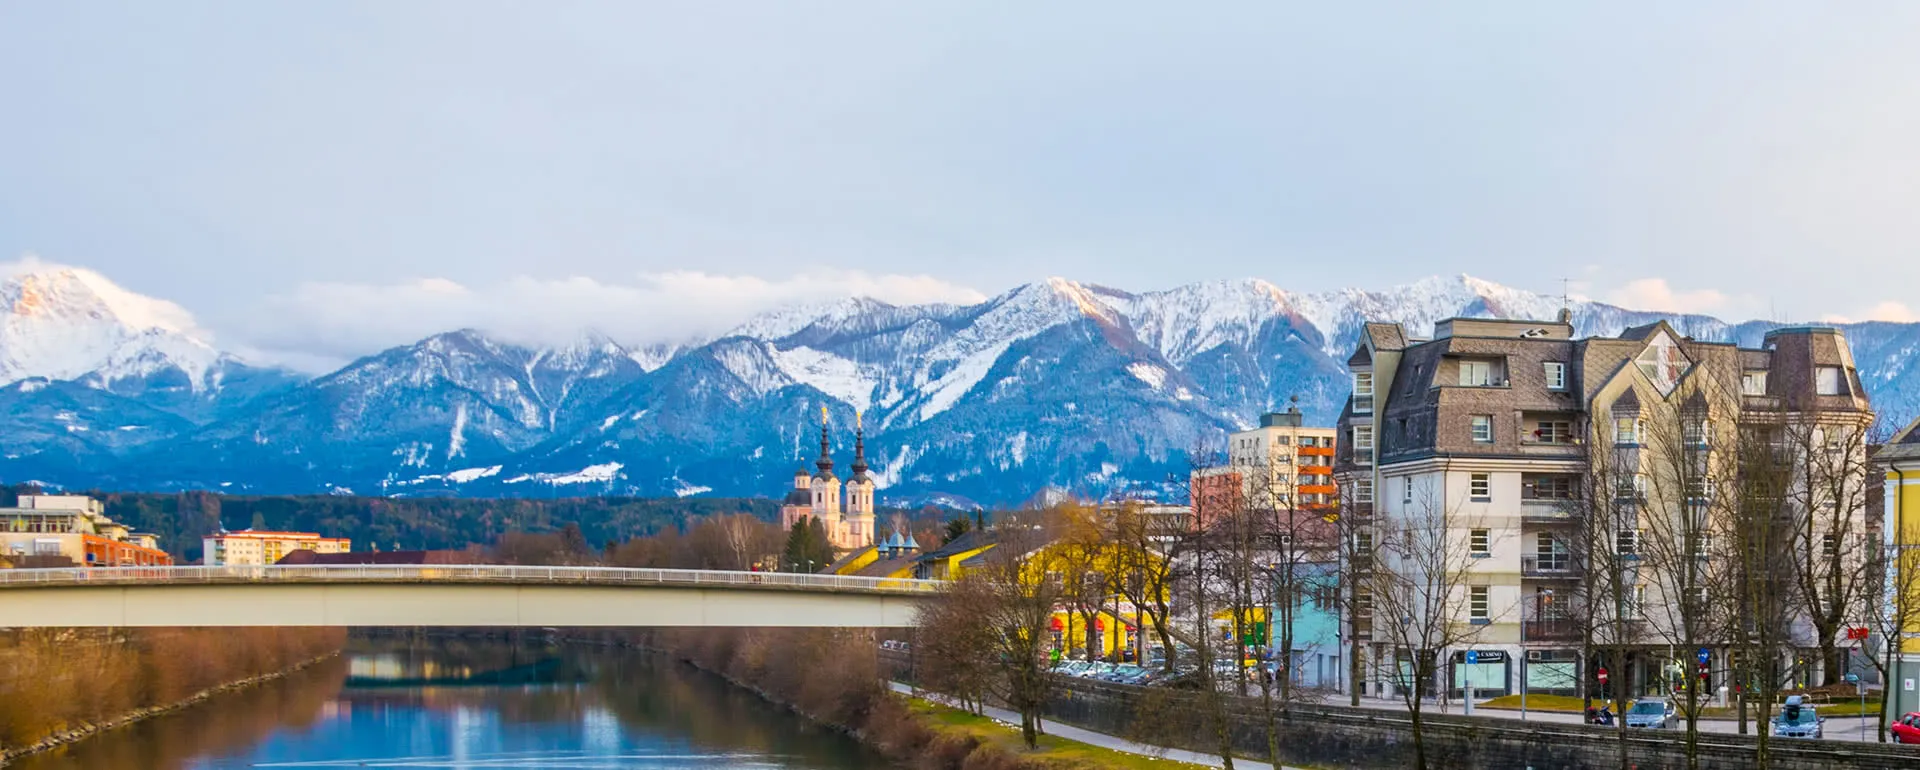 Villach - the destination with youth hostels